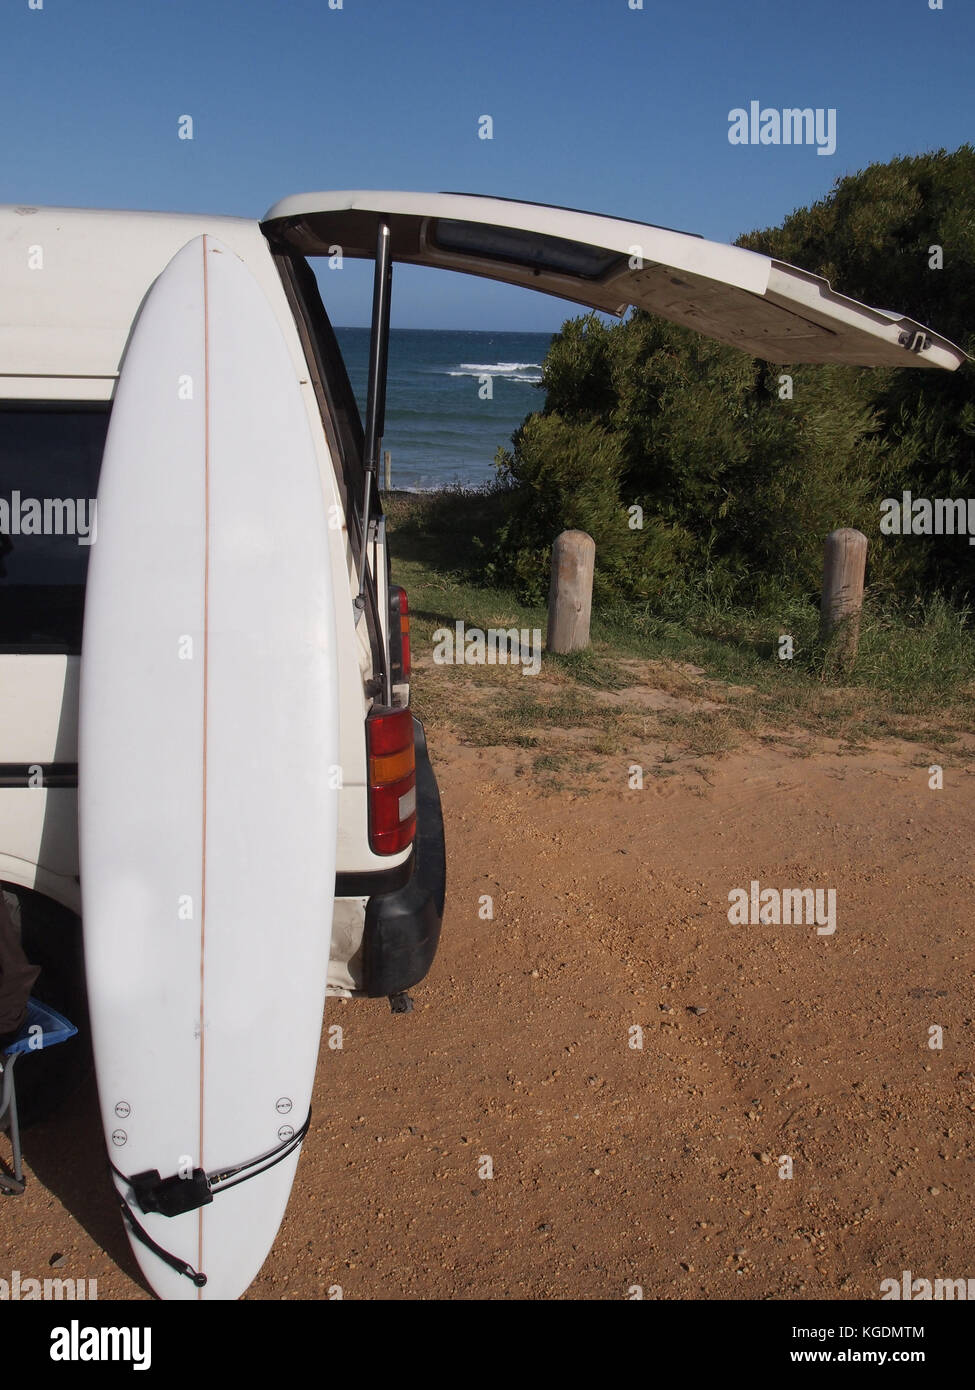 Surfboard in front of a Campervan Stock Photo